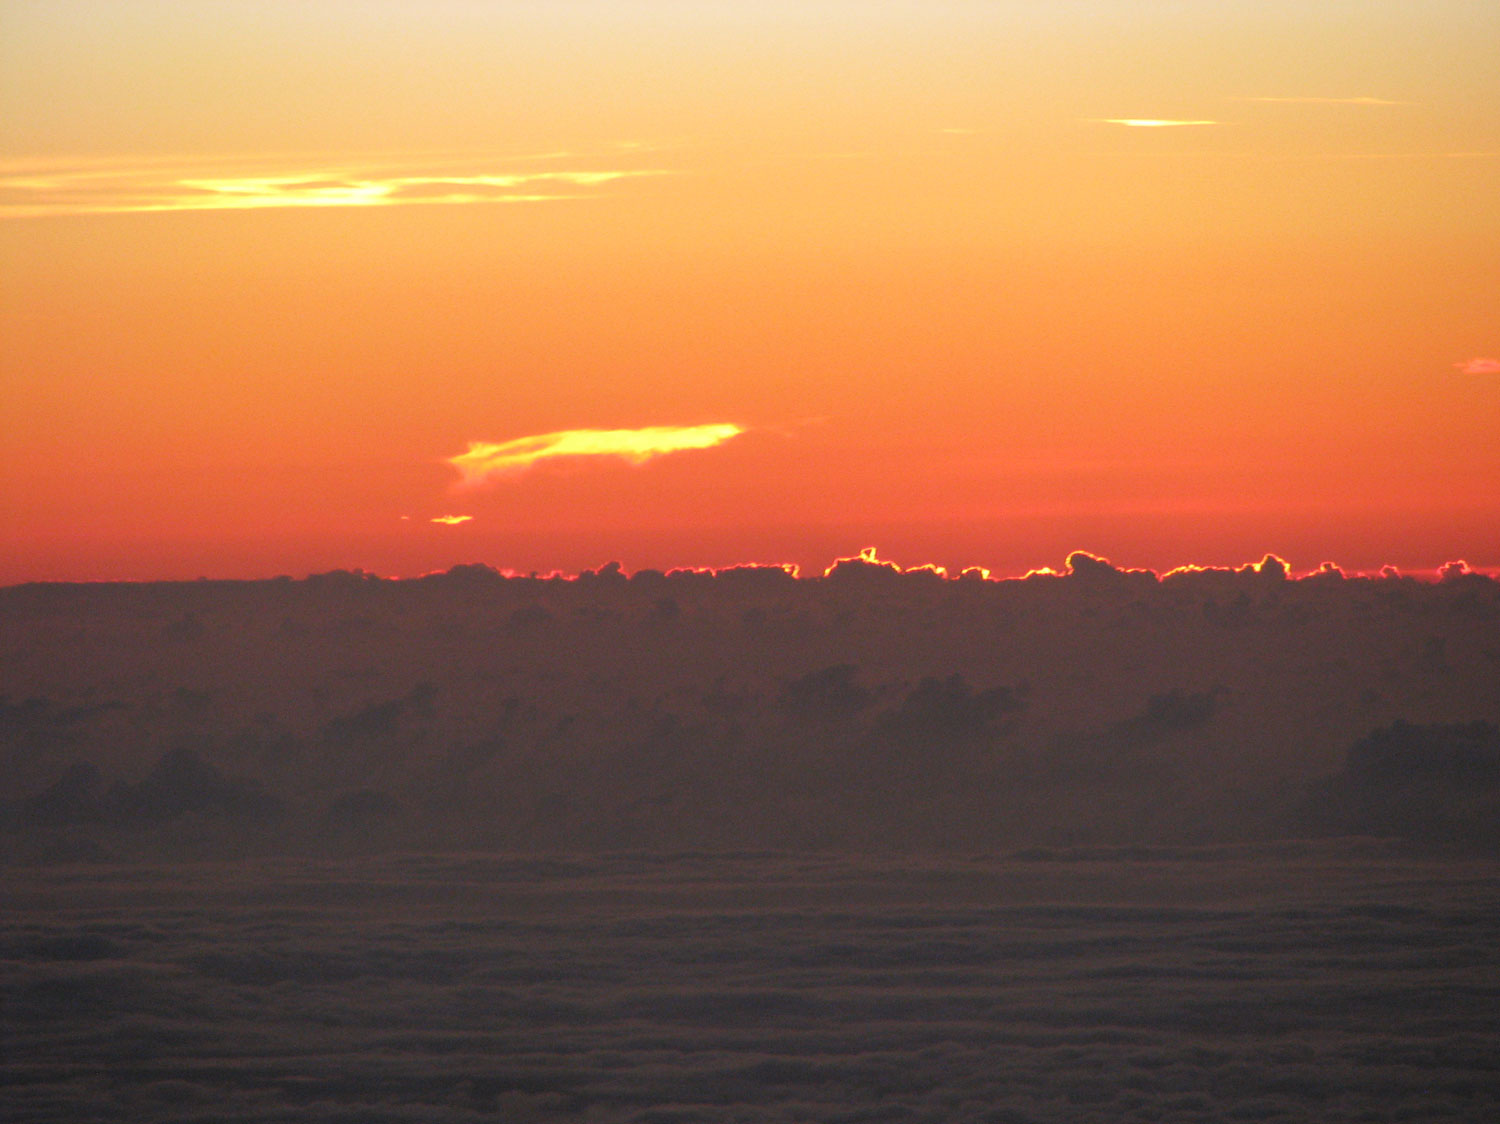 Another close-up view of the sunset sky over the clouds of the Caribbean